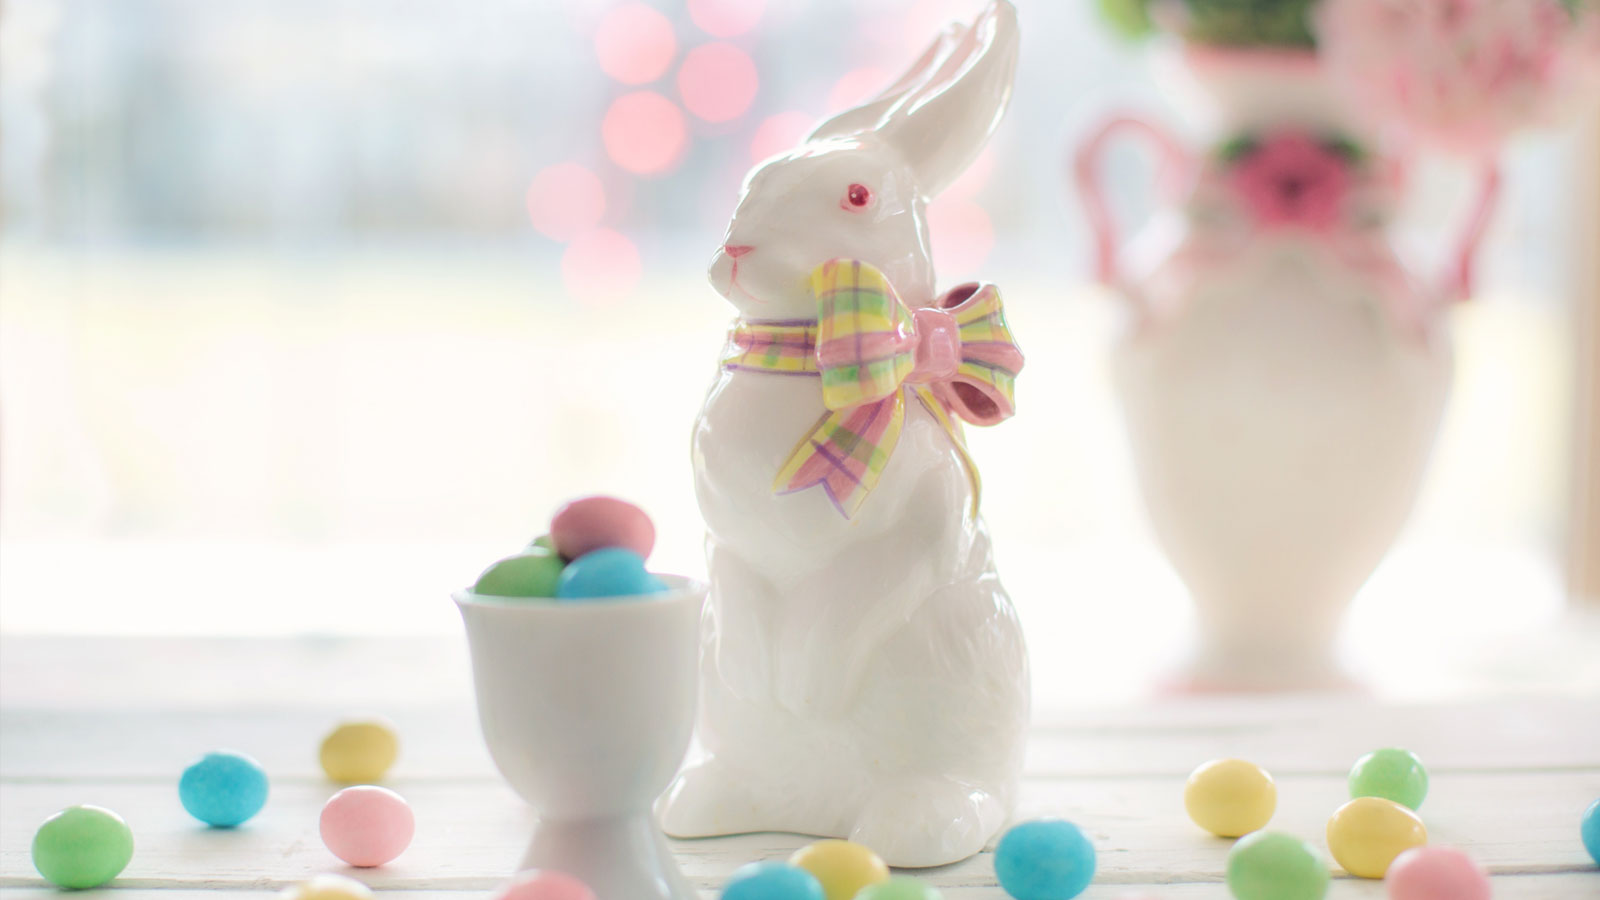 Bunny figurine with plaid bow with pastel Easter candy in an egg cup and on the table